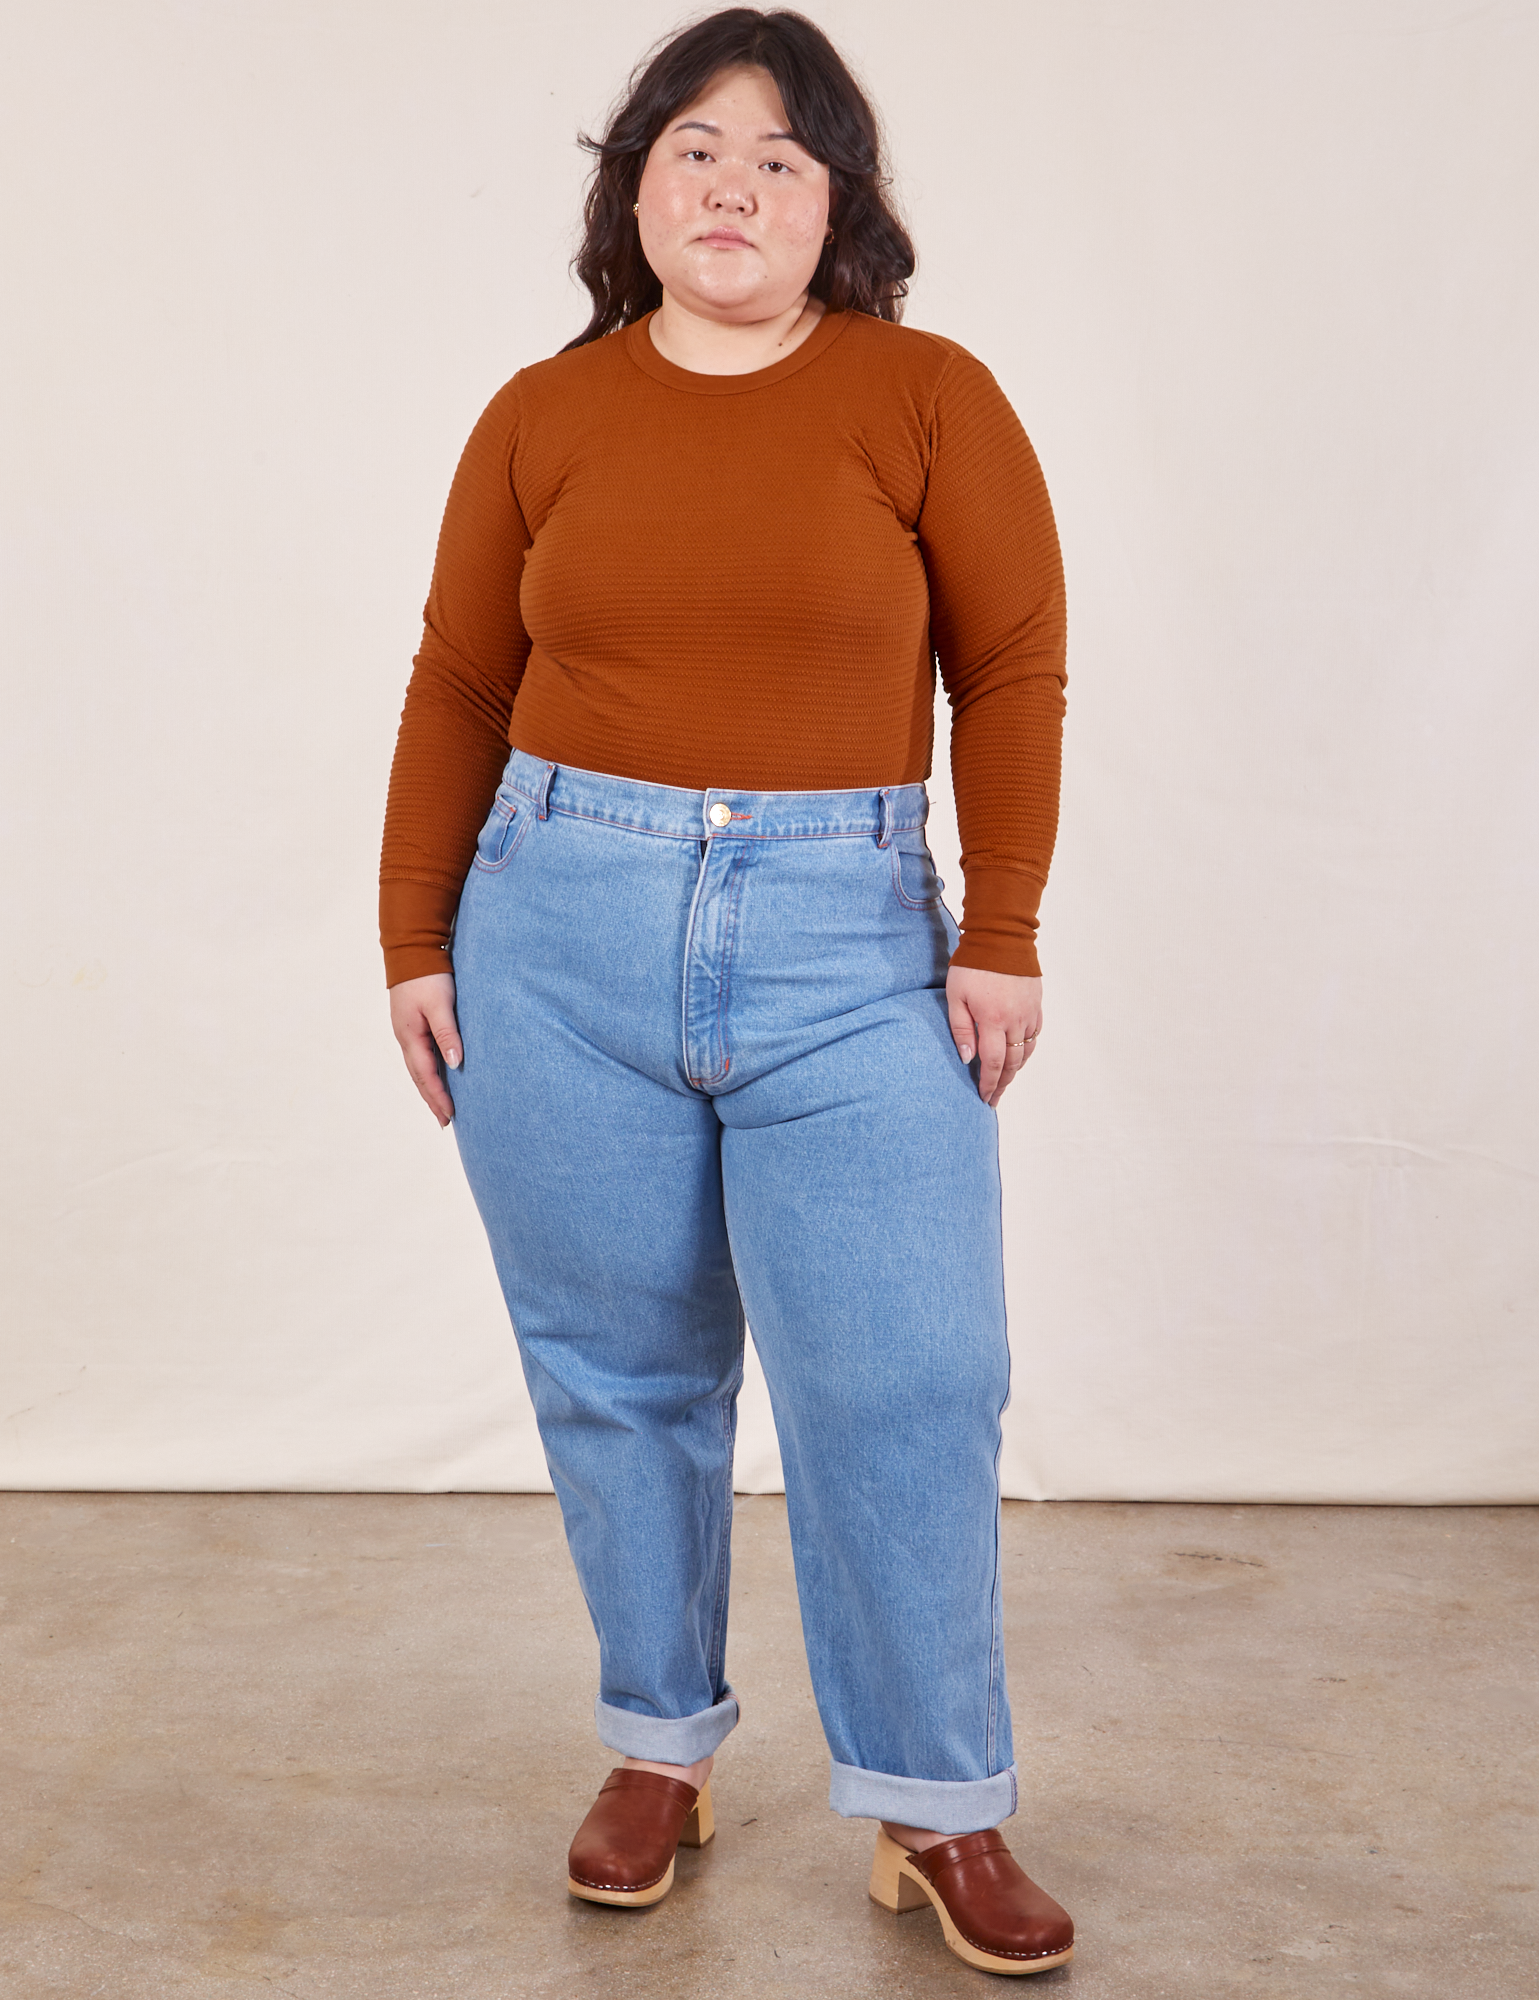 Ashley is wearing Honeycomb Thermal in Burnt Terracotta tucked into Frontier Jeans